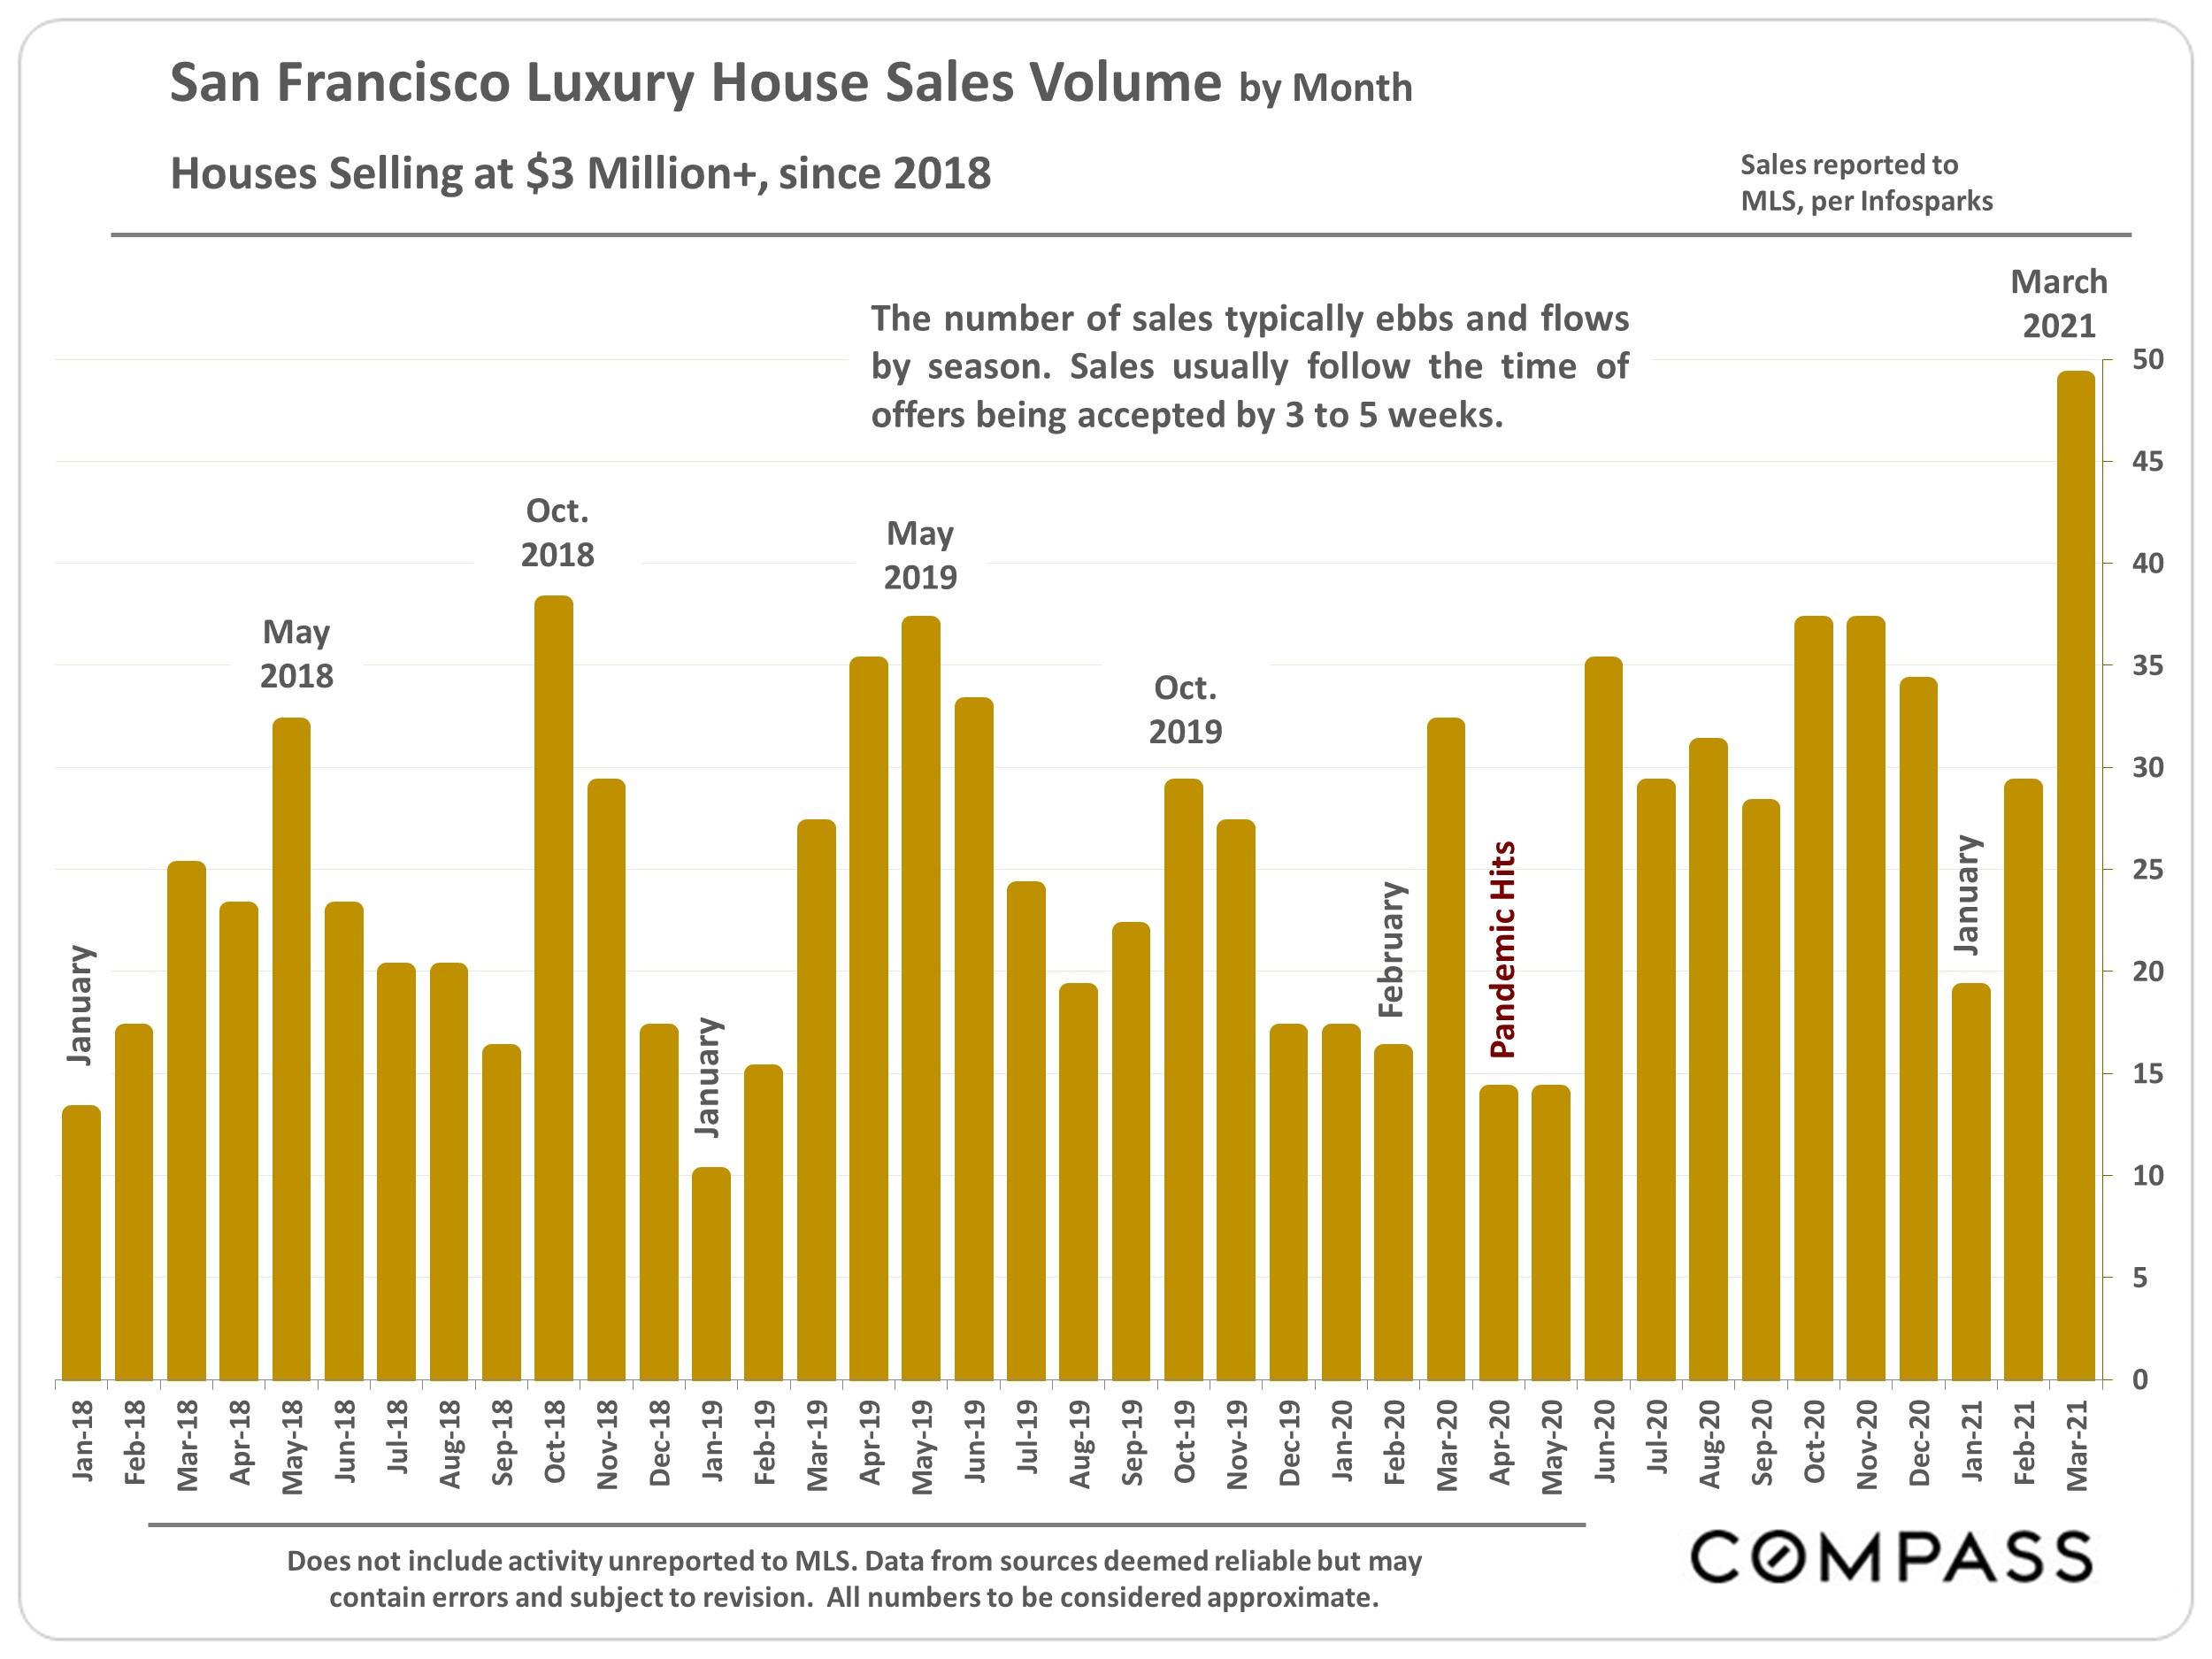 Chart showing the San Francisco Luxury House Sales Volume by Month, Houses Selling at $3M+, since 2018